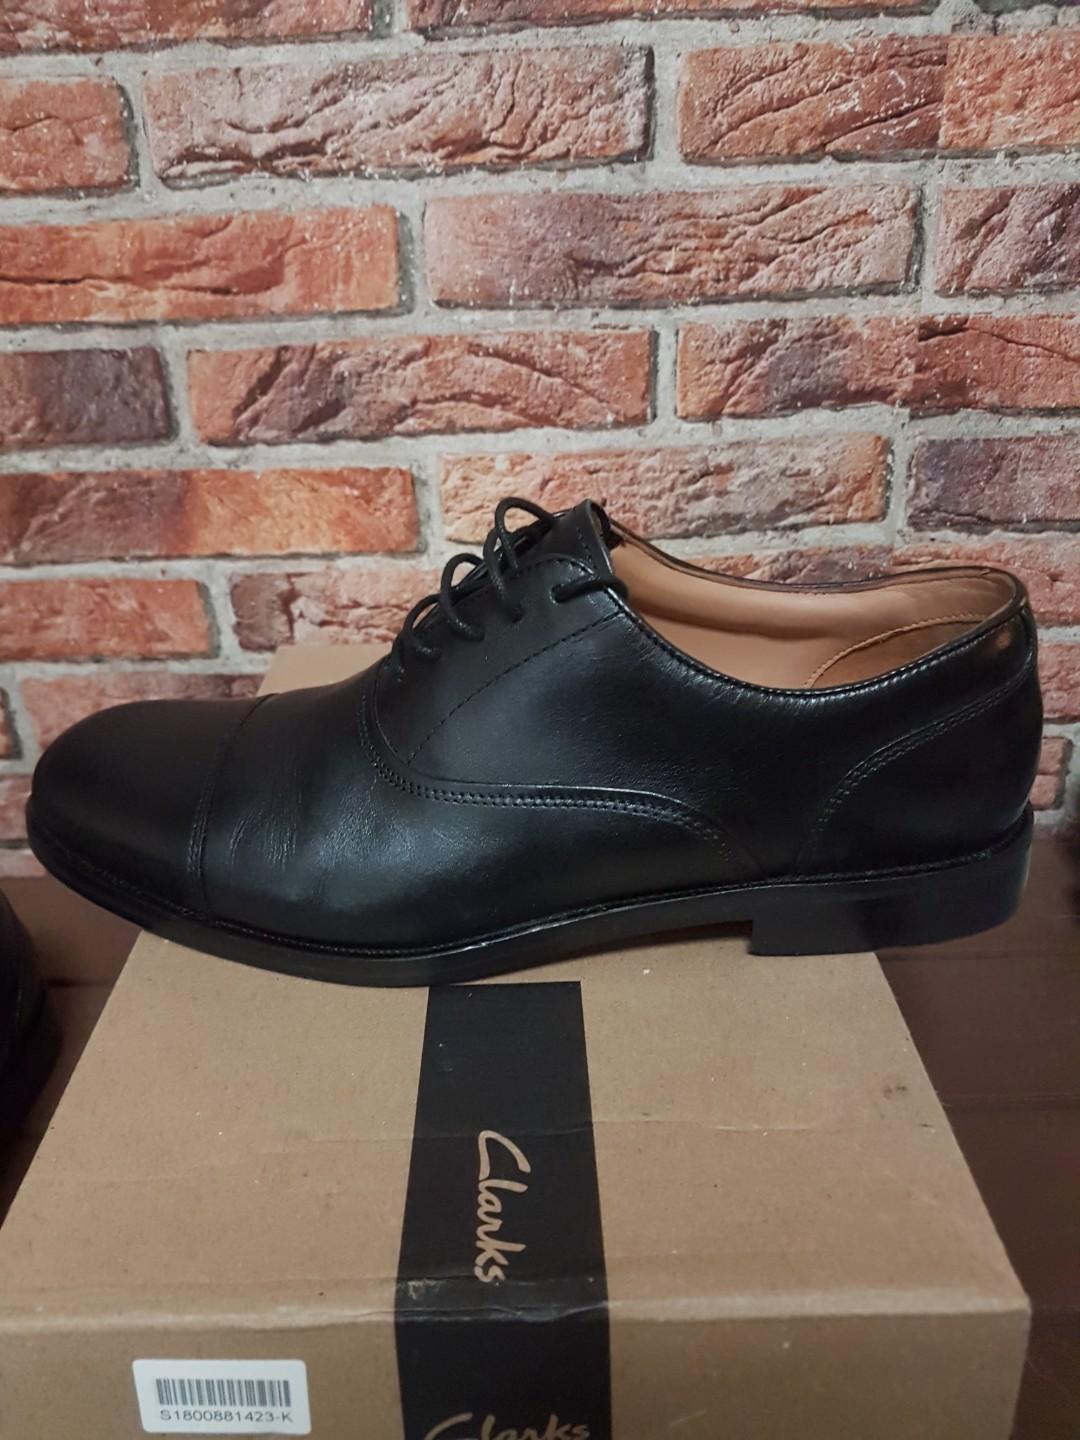 clarks coling boss black leather